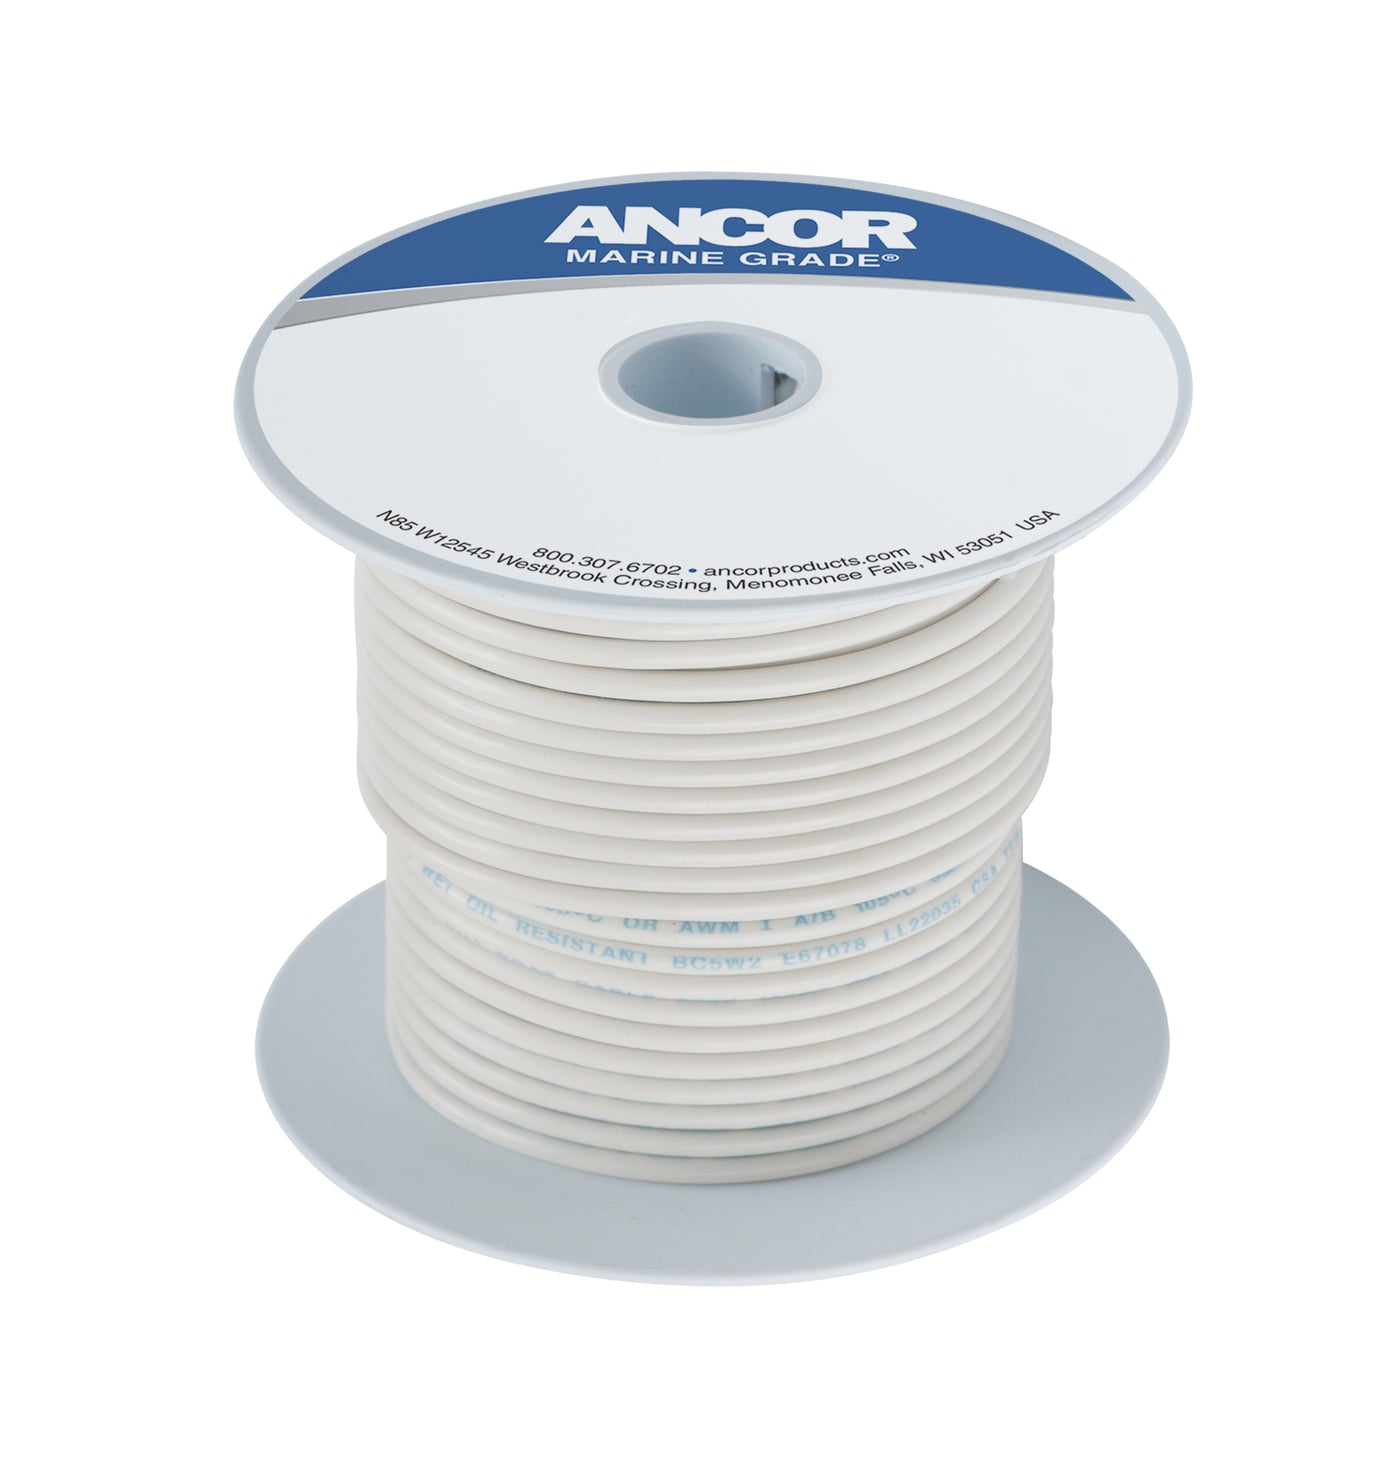 Ancor 111705 Tinned Copper Wire, 8 AWG (8mm²), White - 50ft